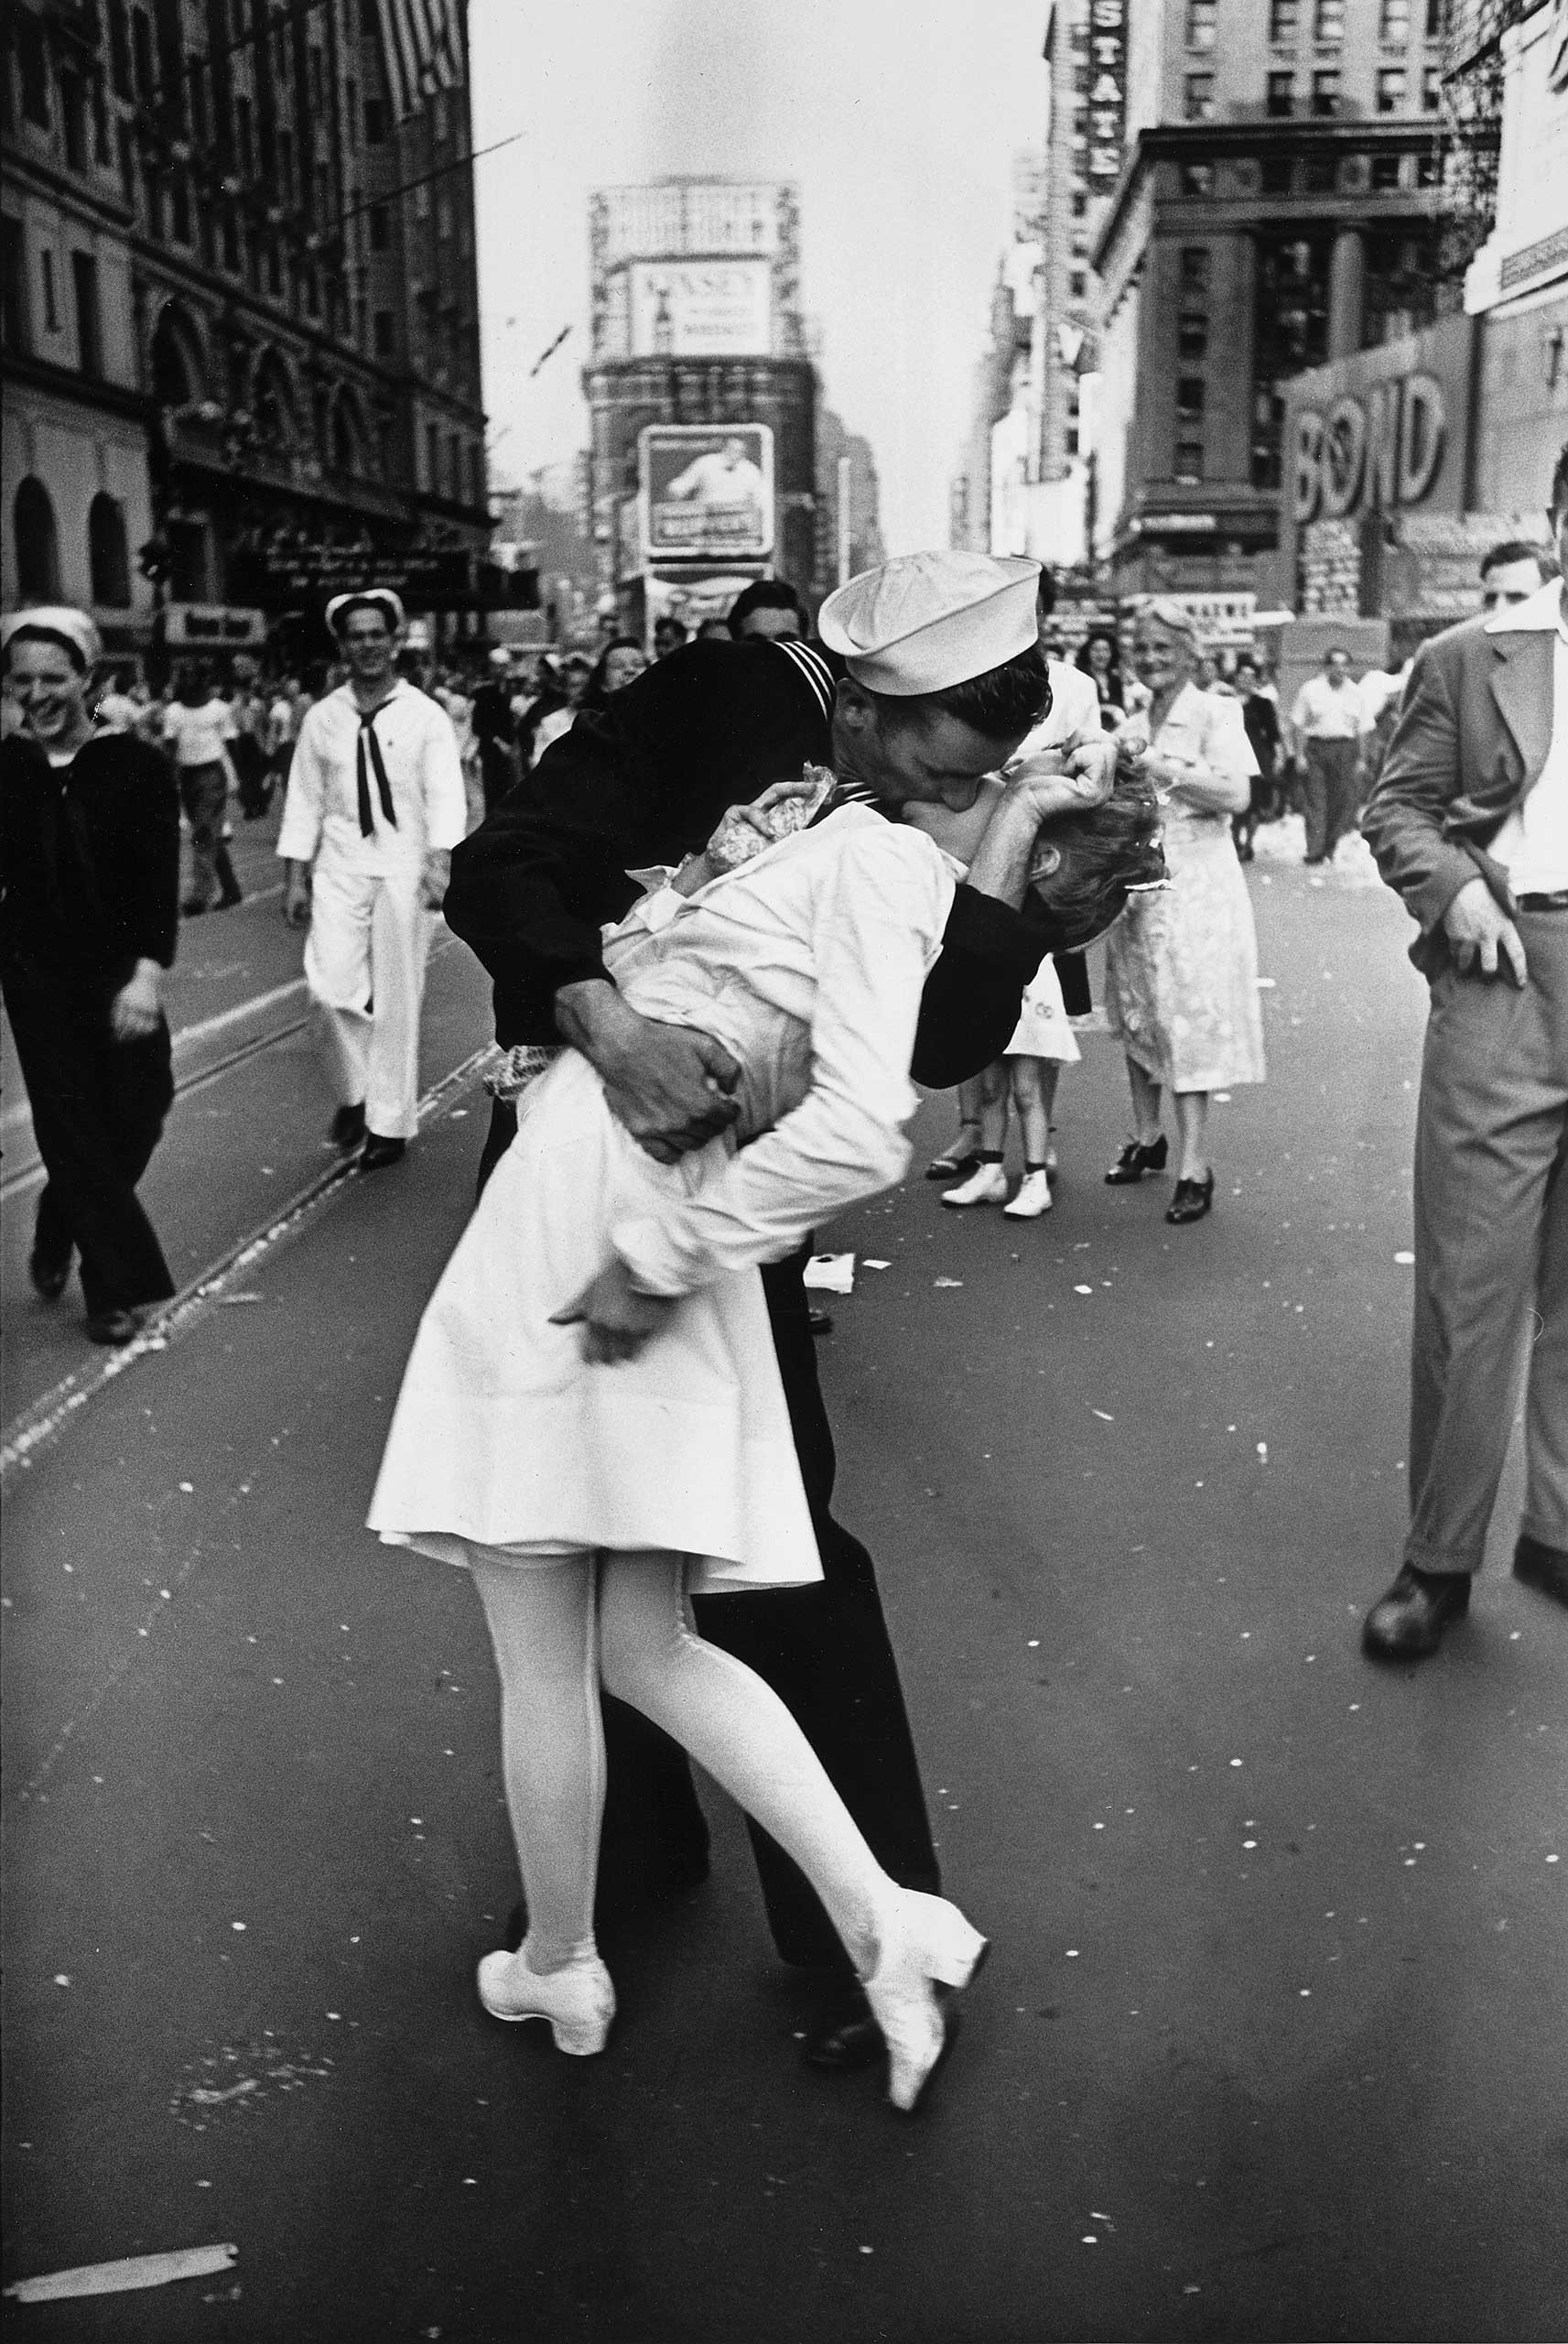 On August 14, 1945 — VJ Day — a jubilant sailor plants a kiss on a nurse in Times Square to celebrate the Allies' long- awaited World War II victory over Japan. Originally published (not as a cover shot, as most people assume today, but as just one in a series of "VJ Day victory celebration"